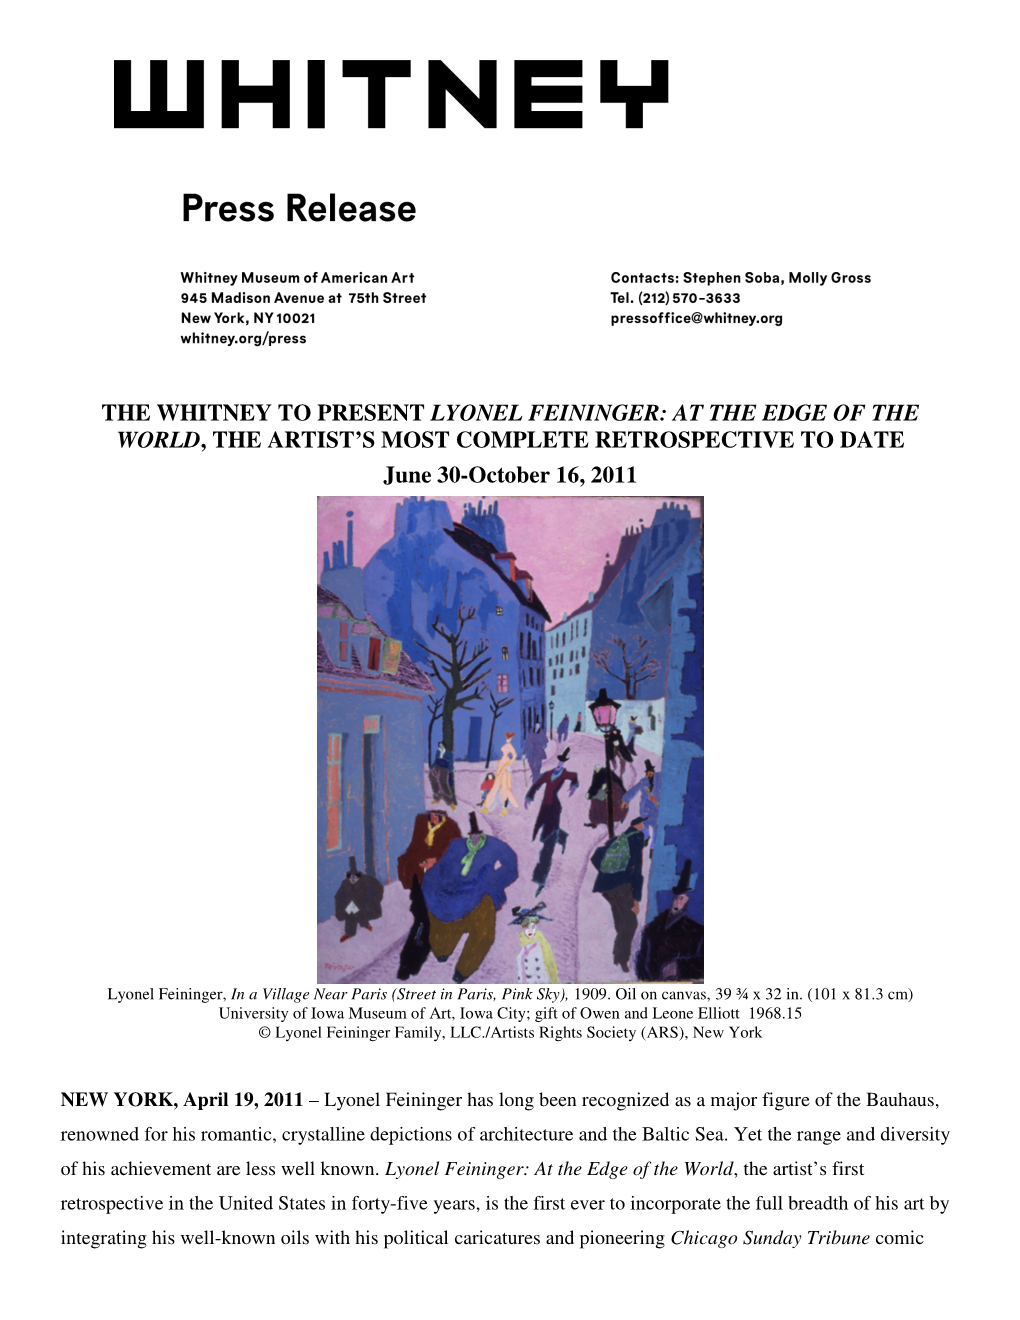 THE WHITNEY to PRESENT LYONEL FEININGER: at the EDGE of the WORLD , the ARTIST’S MOST COMPLETE RETROSPECTIVE to DATE June 30-October 16, 2011